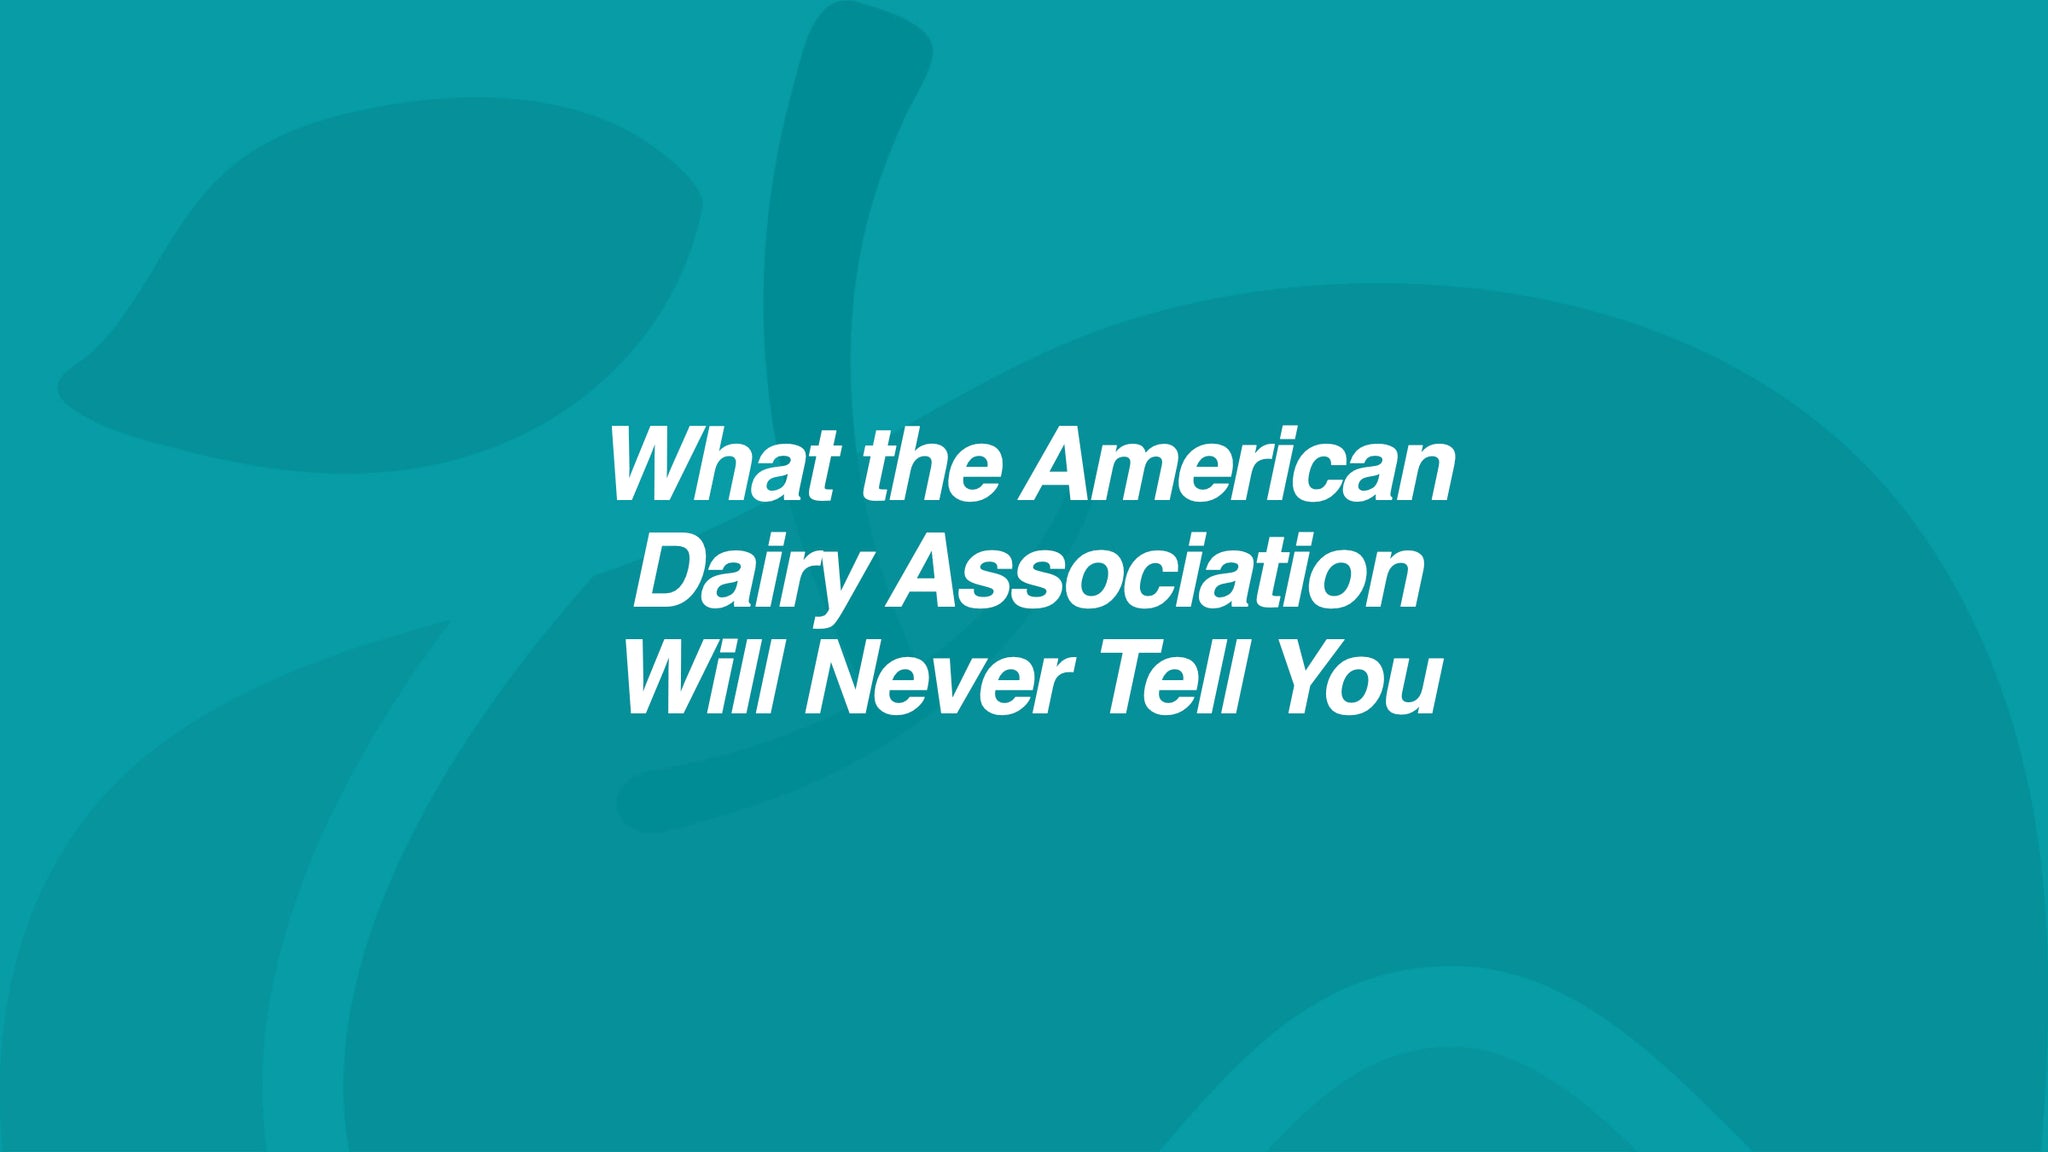 What the American Dairy Association Will Never Tell You